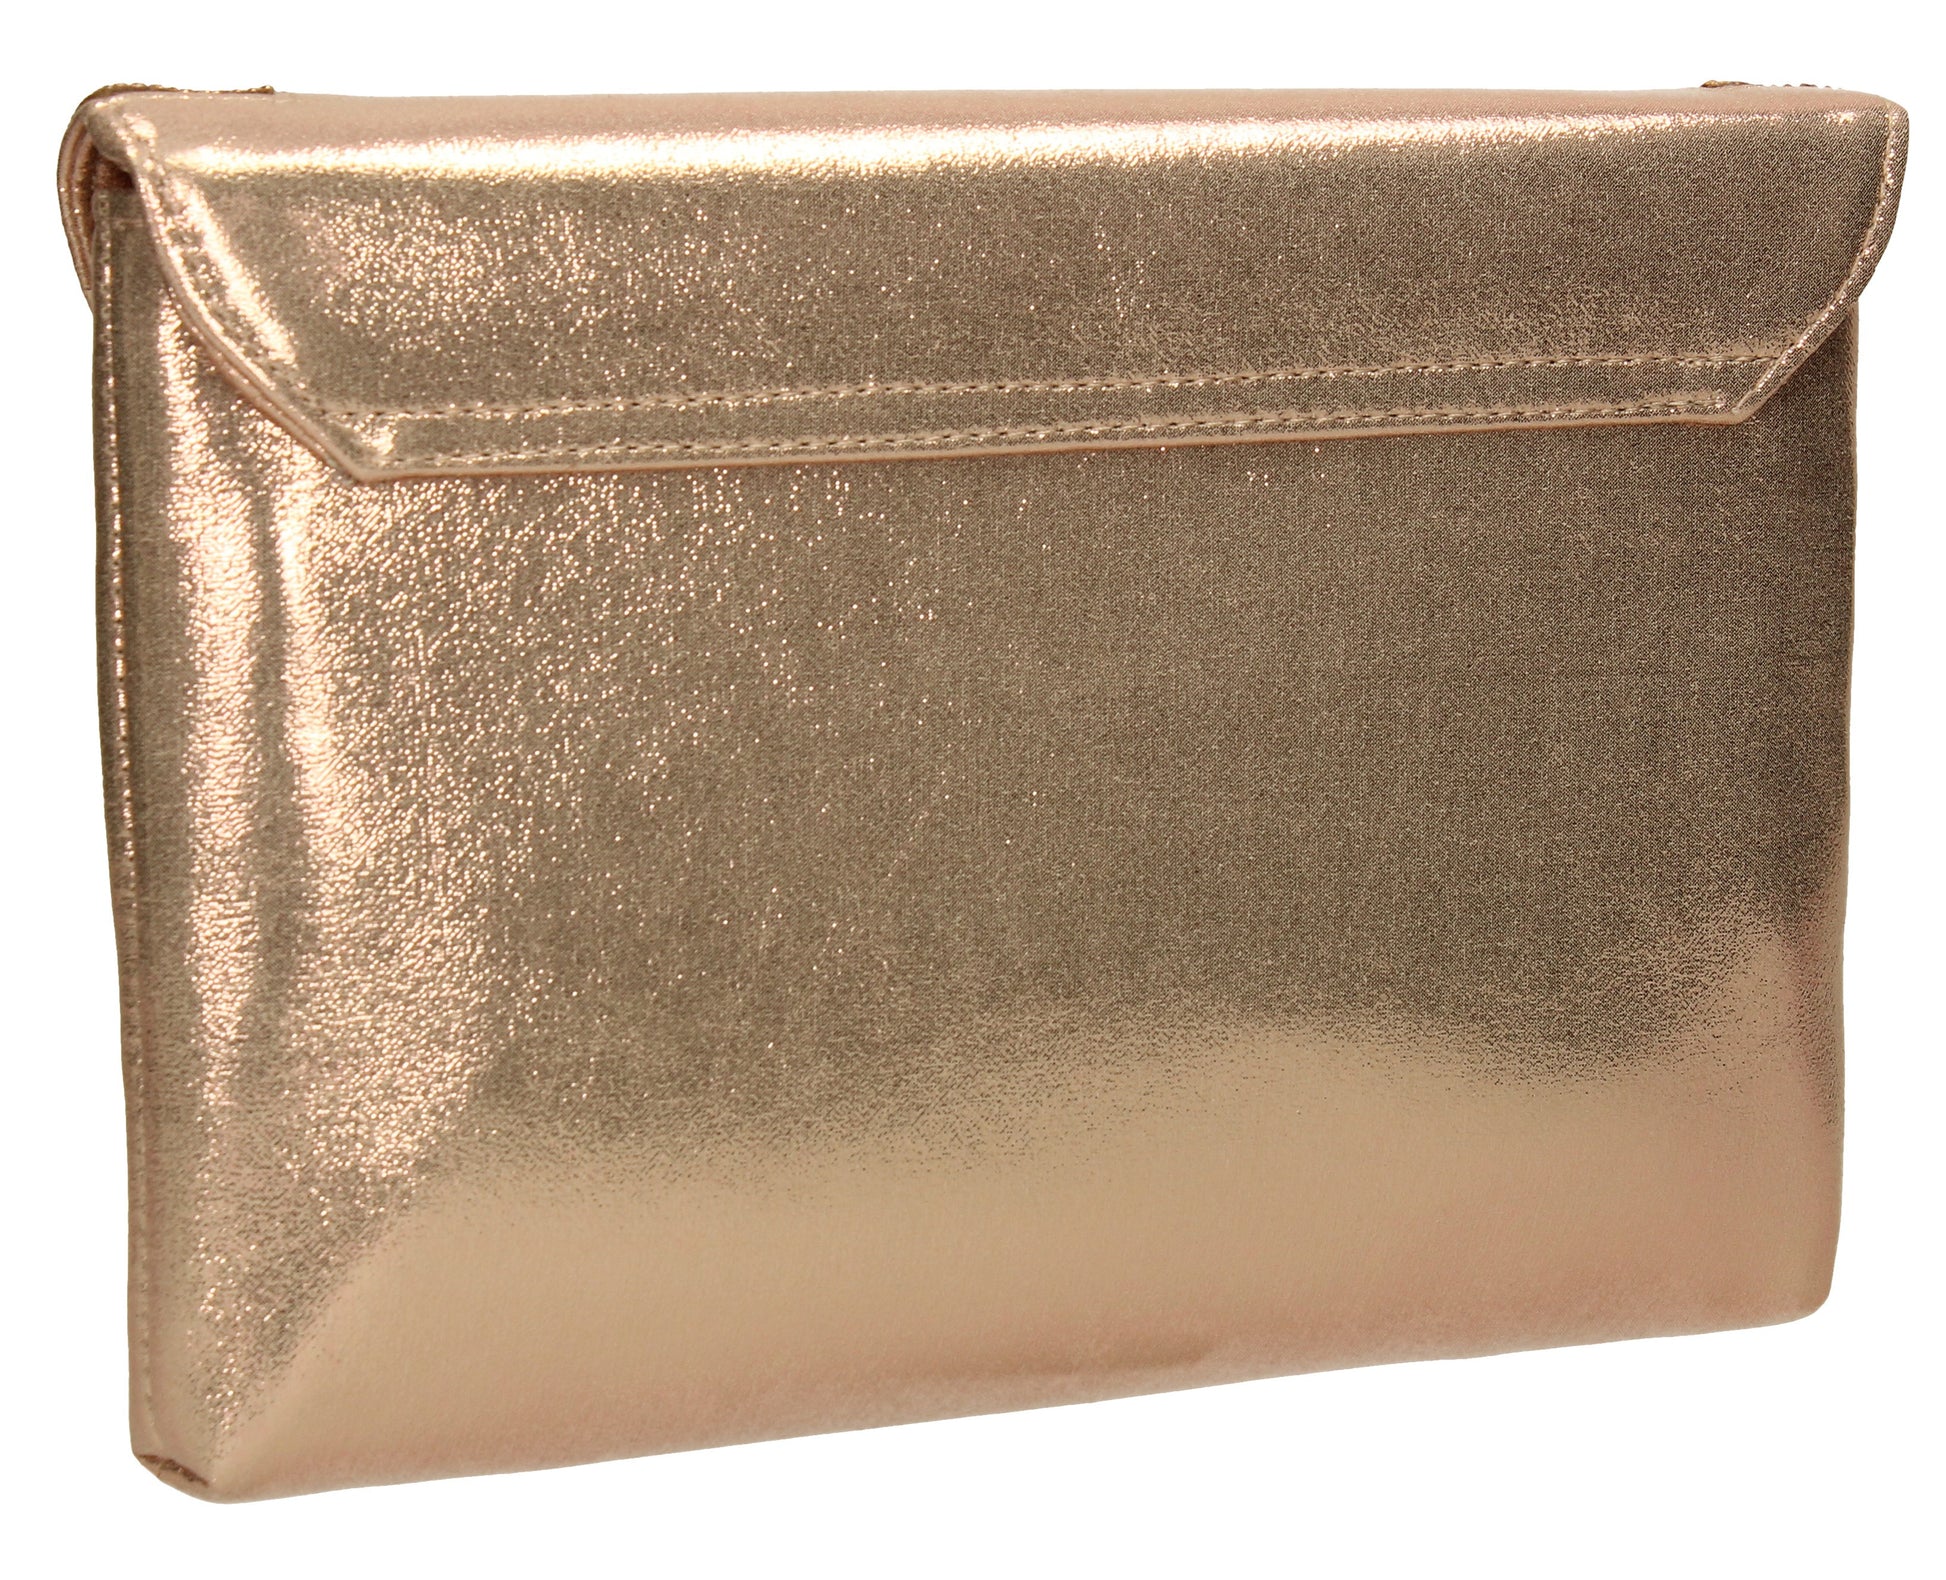 SWANKYSWANS Lilly Clutch Bag Champagne Cute Cheap Clutch Bag For Weddings School and Work